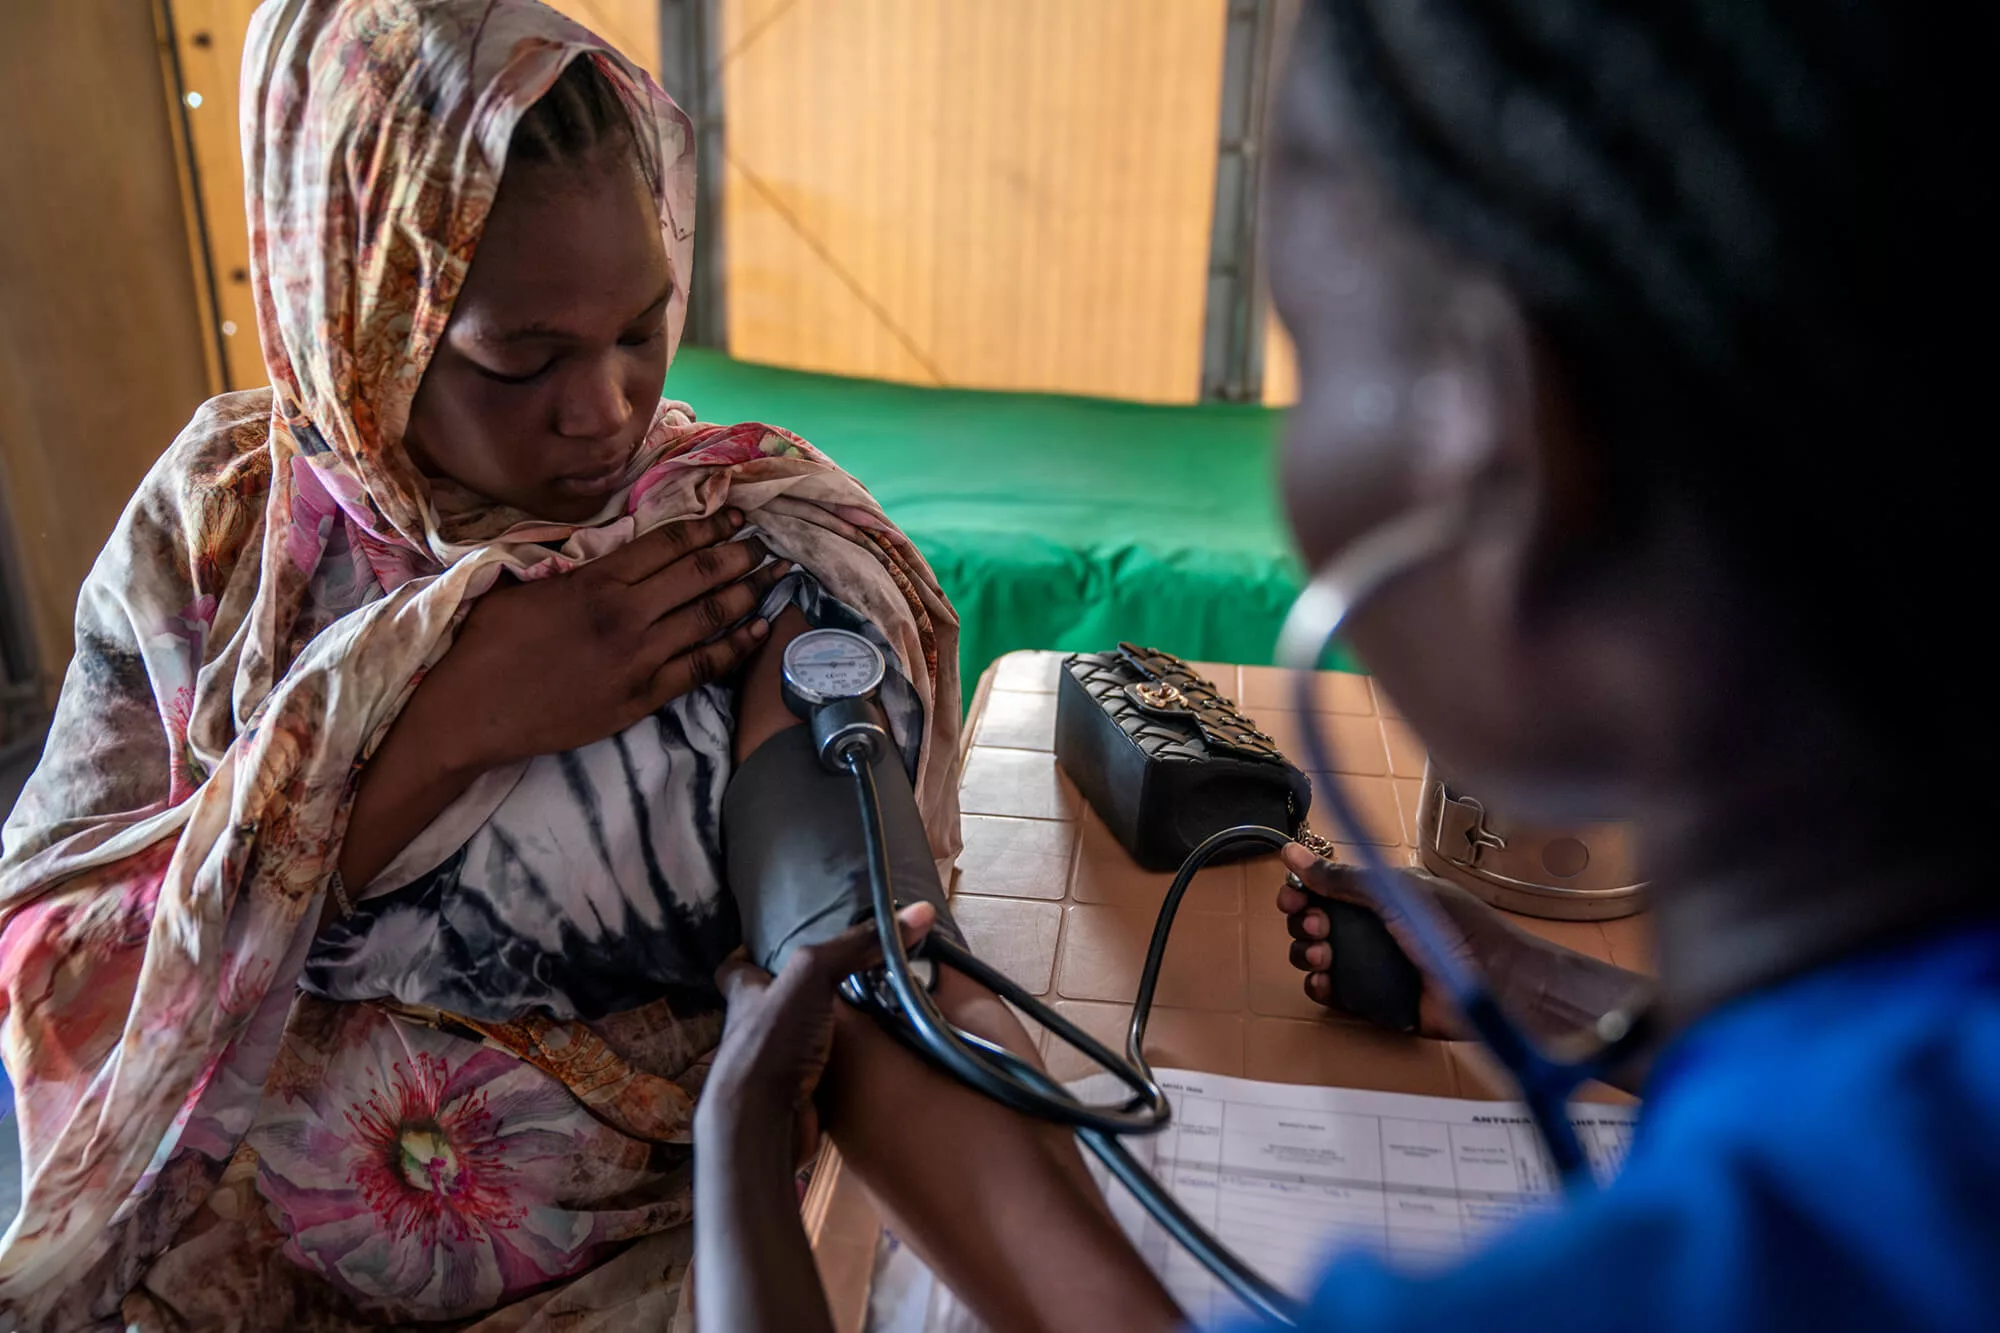 Midwife Nyapin Chol Put conducts a prenatal checkup with a patient at the health clinic in Renk, South Sudan.